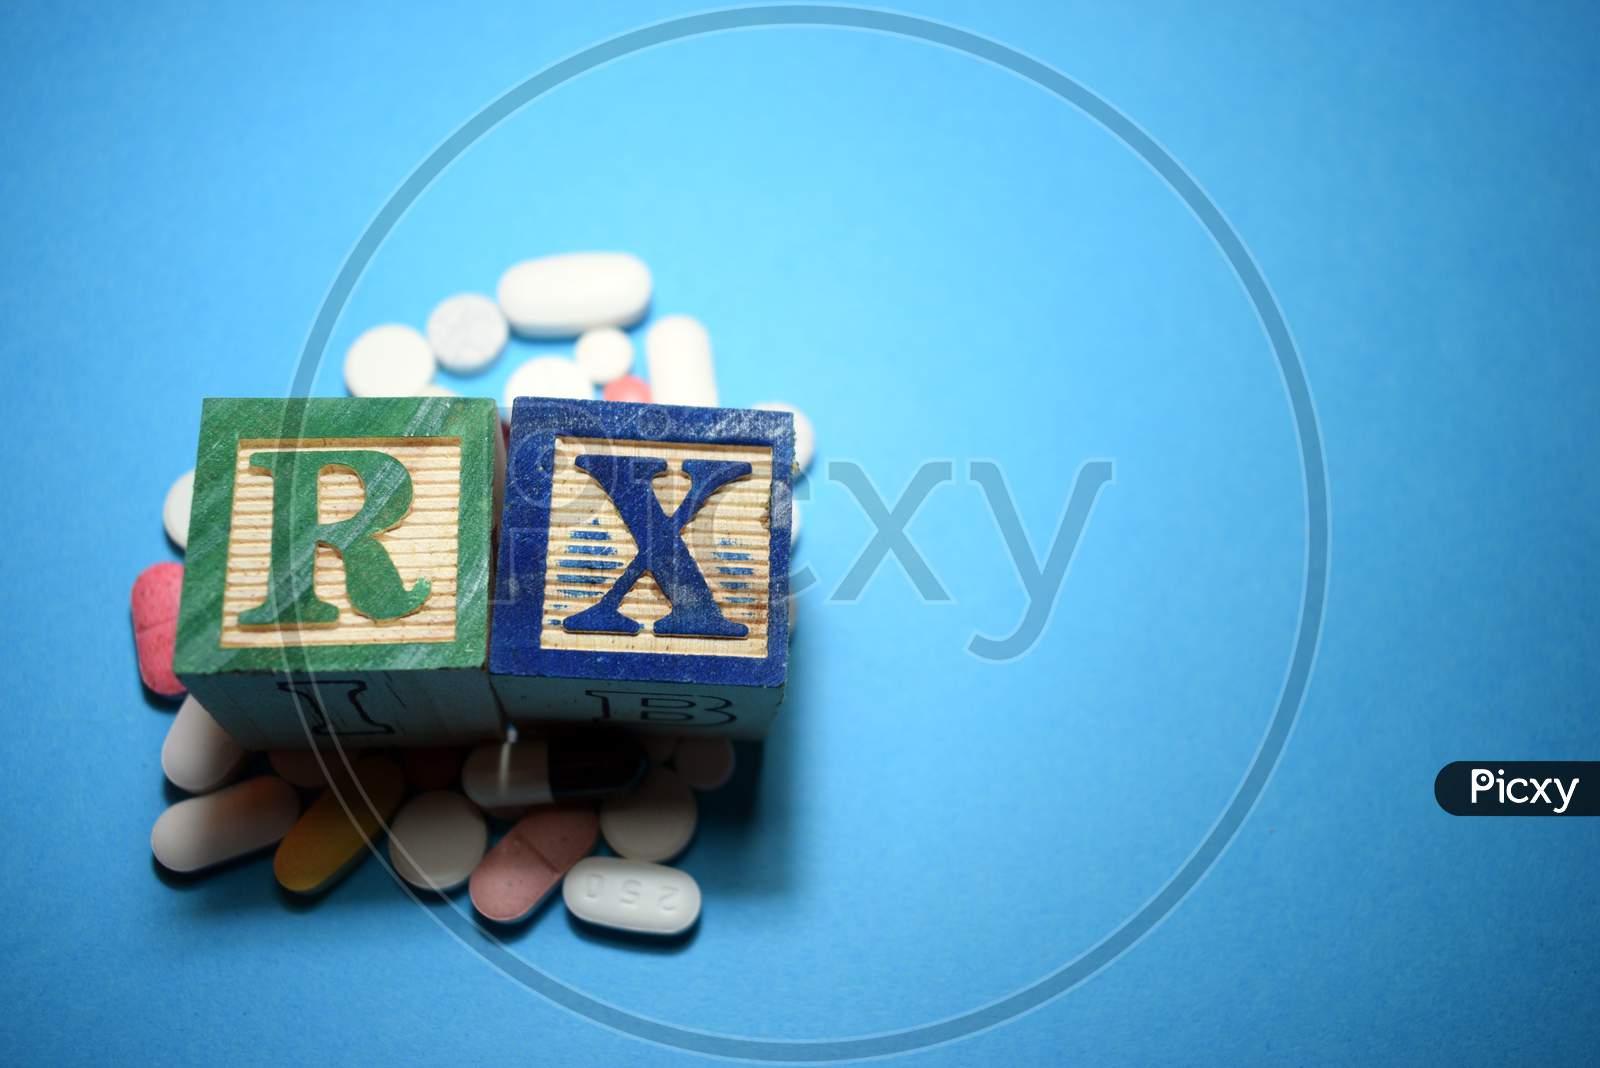 Rx Text In Wooden Block